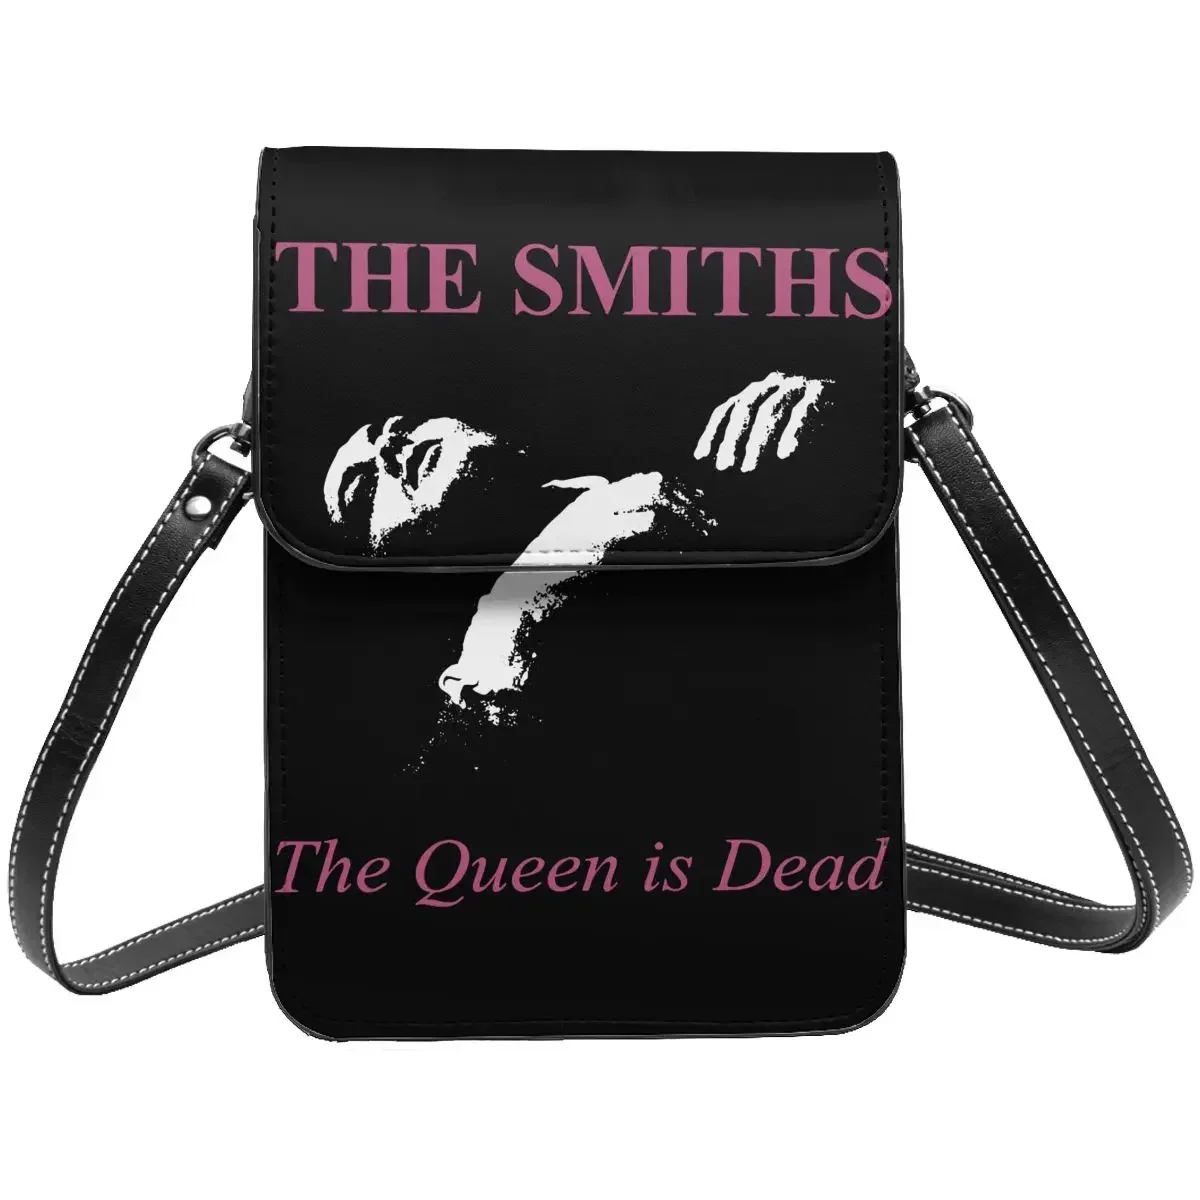 The Smiths The Queen Is Dead Leather Cell Phone Bag Accessories Fashionable Rock Music Mini Shoulder Bag Card Case Durable